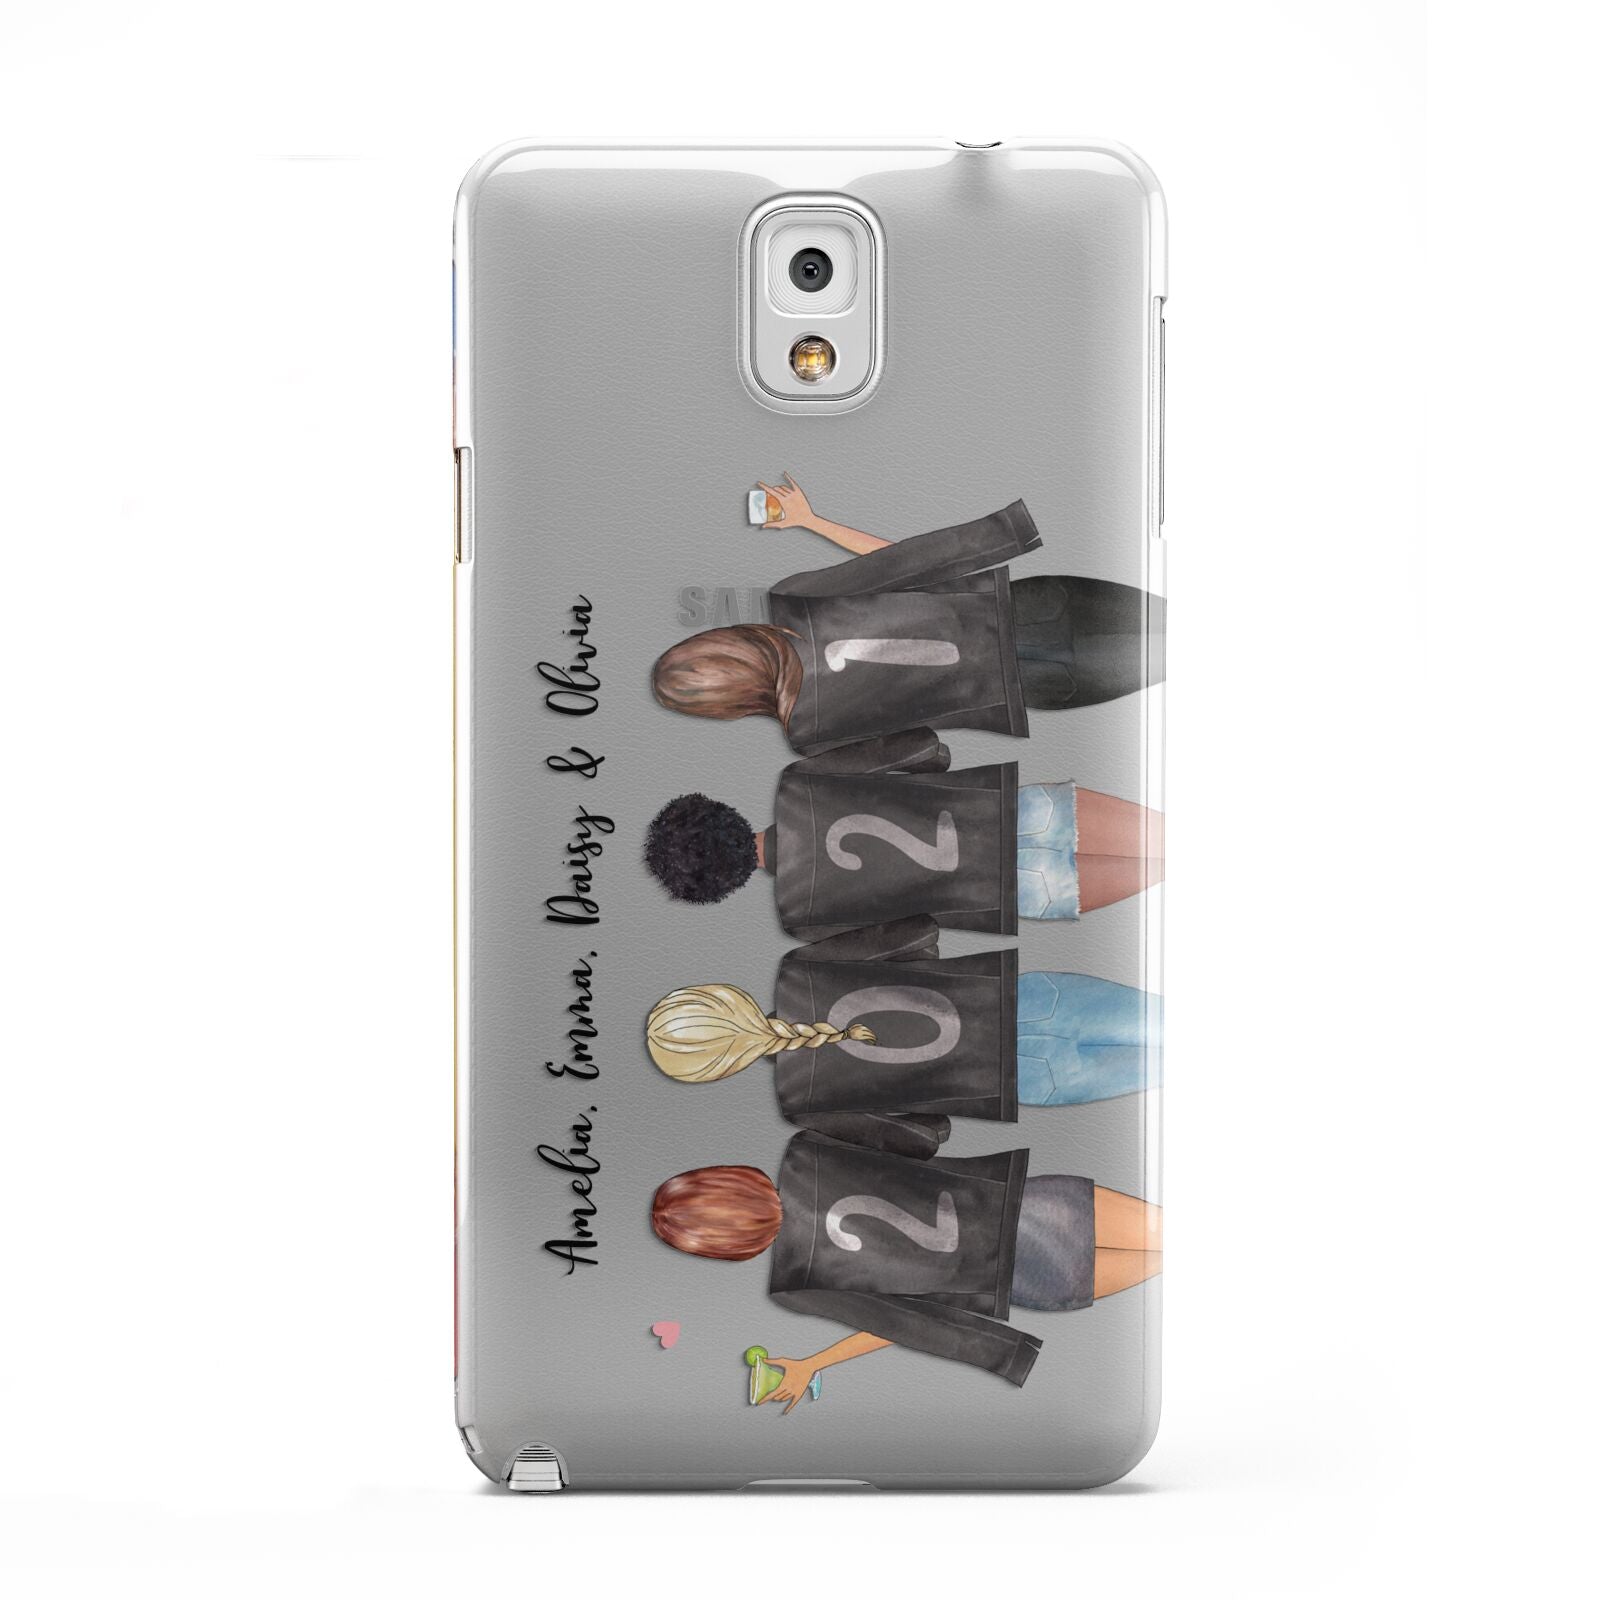 4 Best Friends with Names Samsung Galaxy Note 3 Case